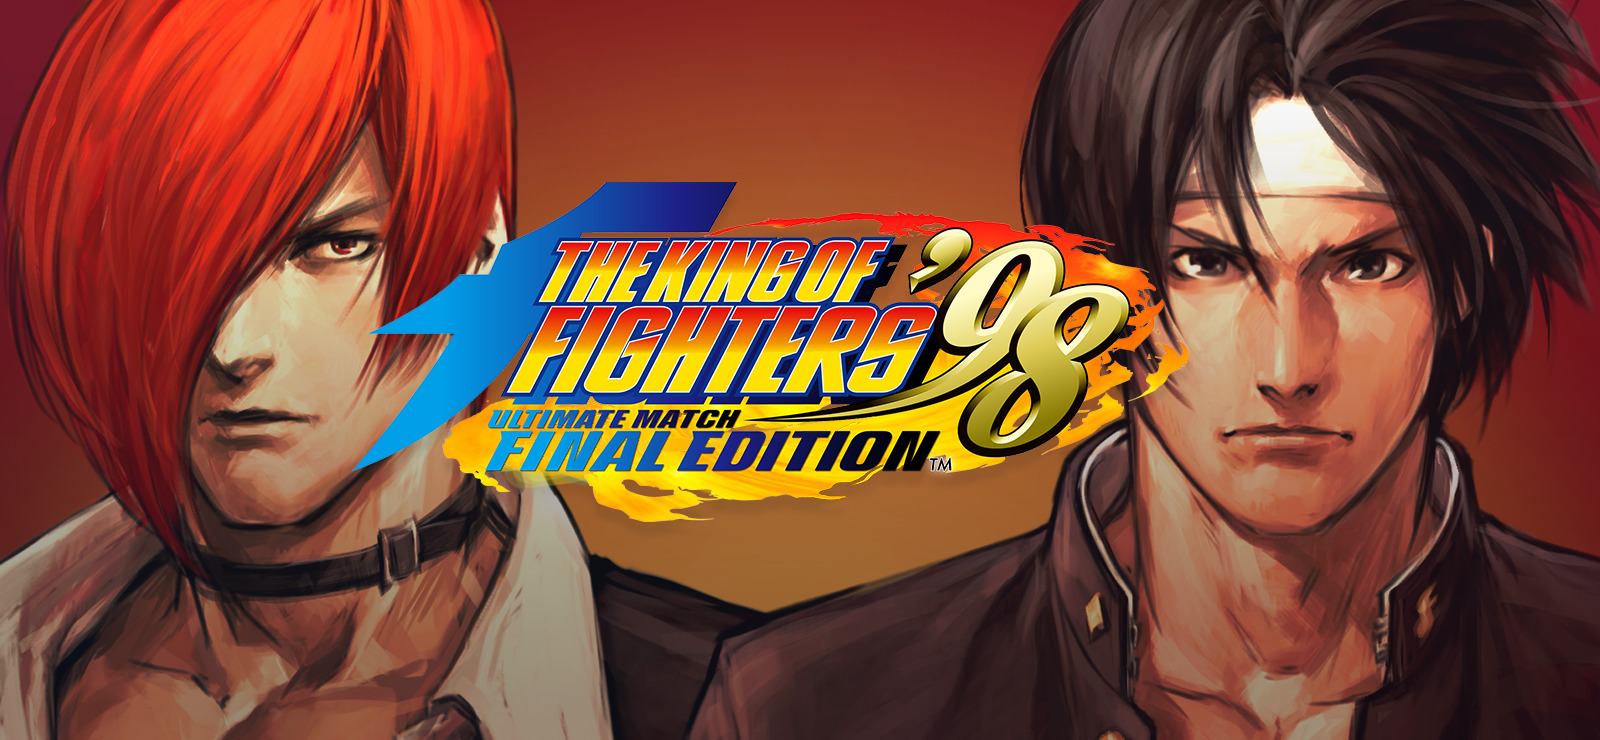 MAME] King of Fighters '98 - Ultimate Match Hero (PGM2) (newer WIP video) 